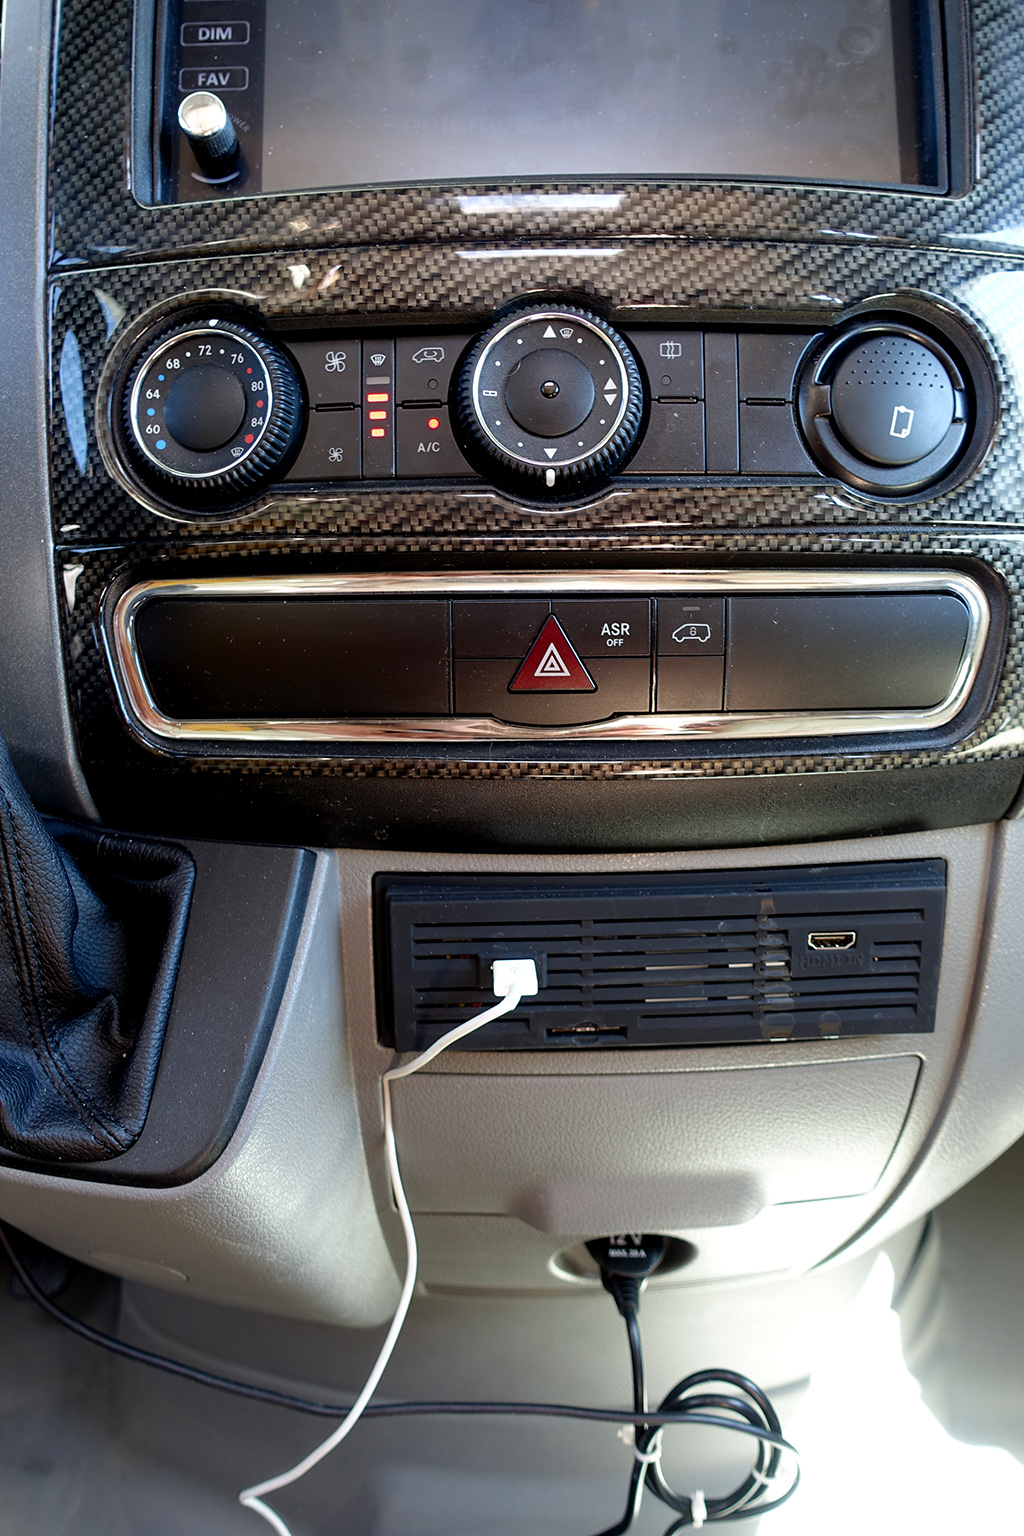 Air controls and plug ins on front dash.